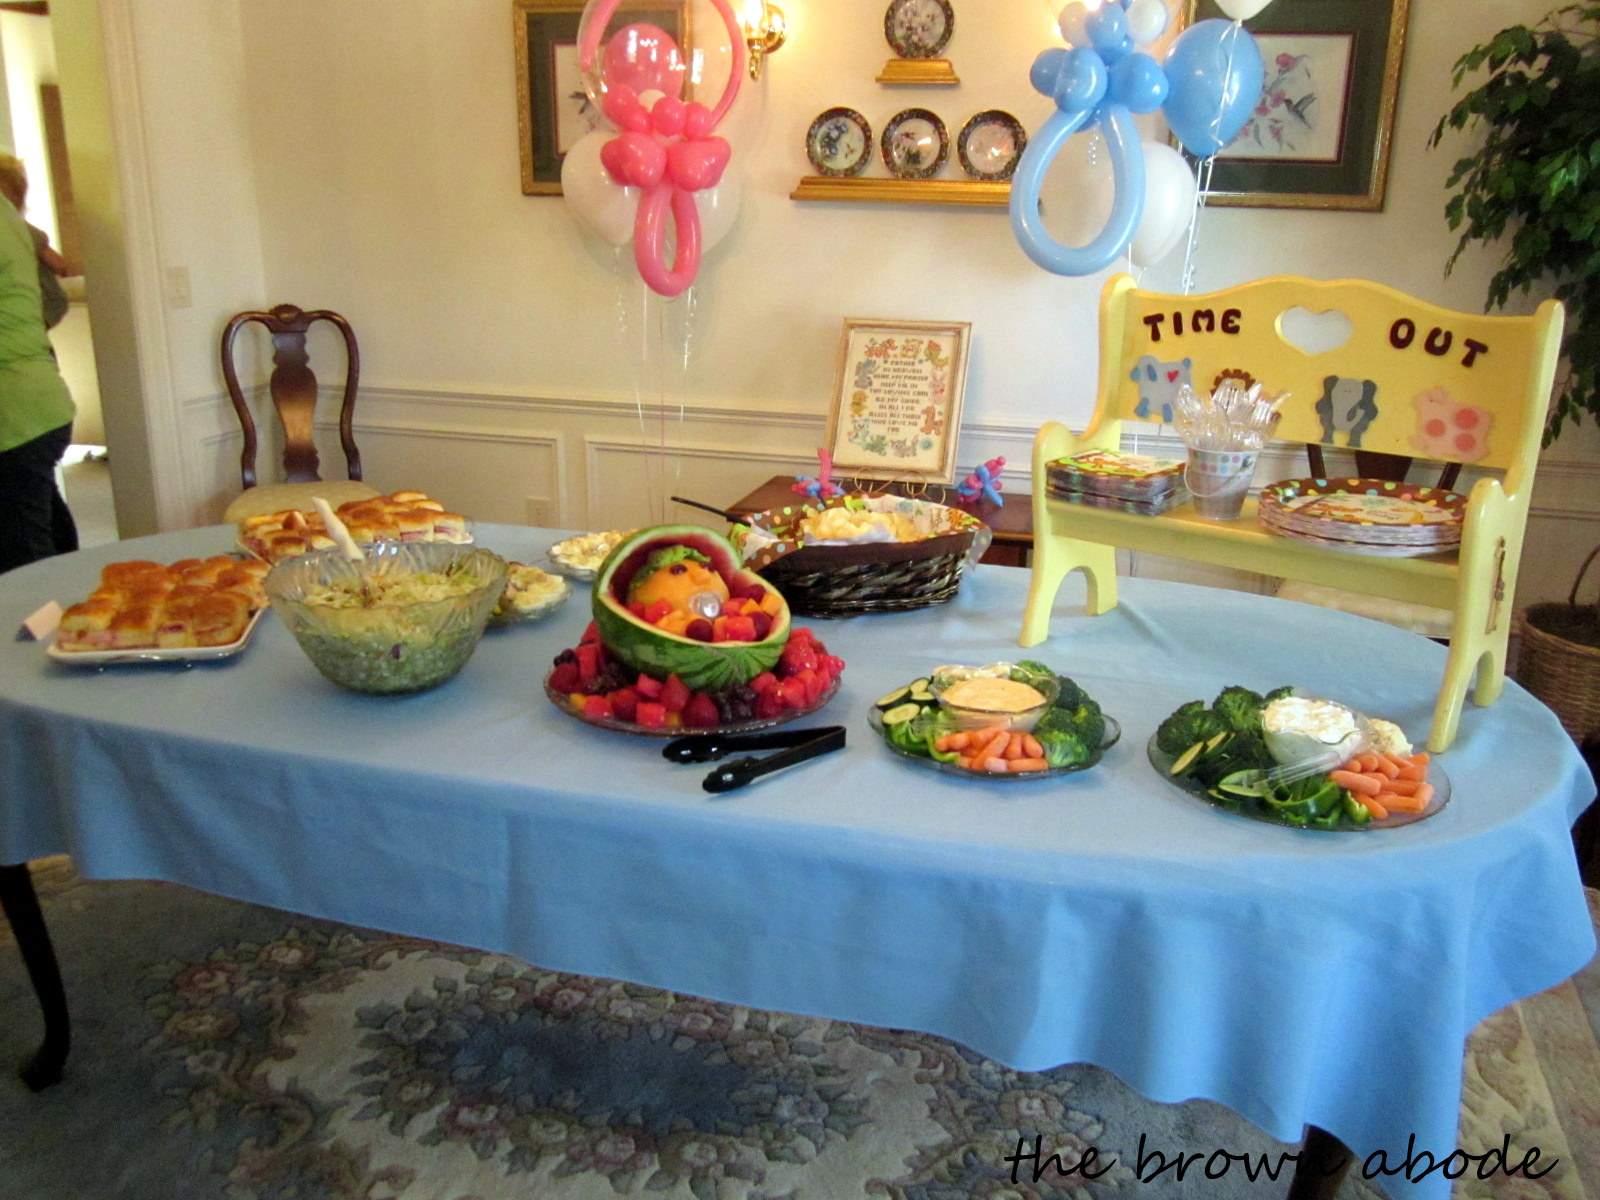 the brown abode: It's Baby Time!... Unisex baby shower decor